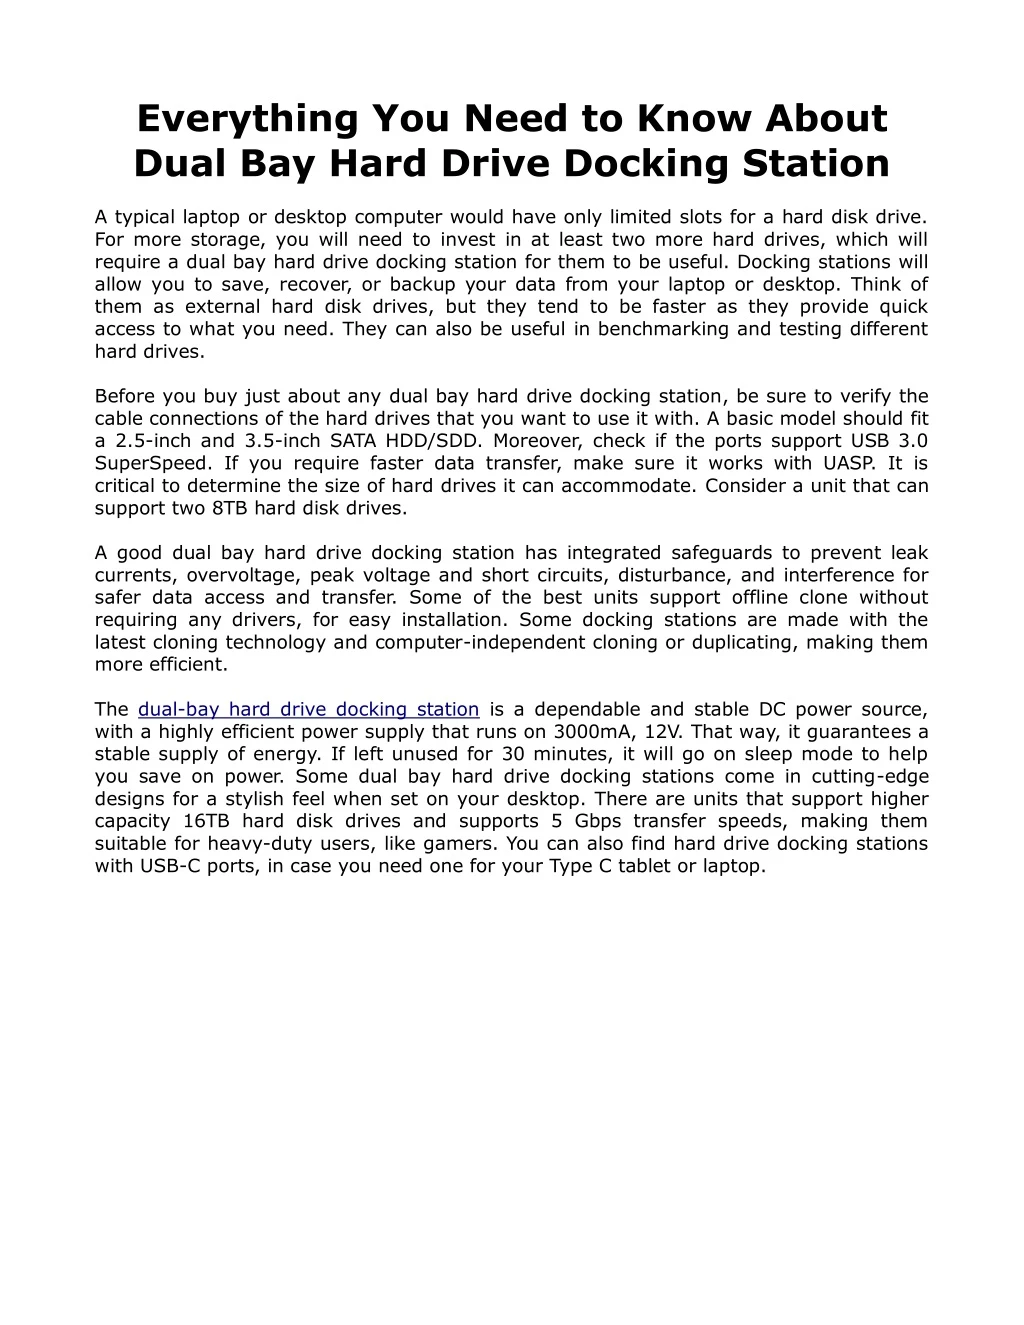 everything you need to know about dual bay hard